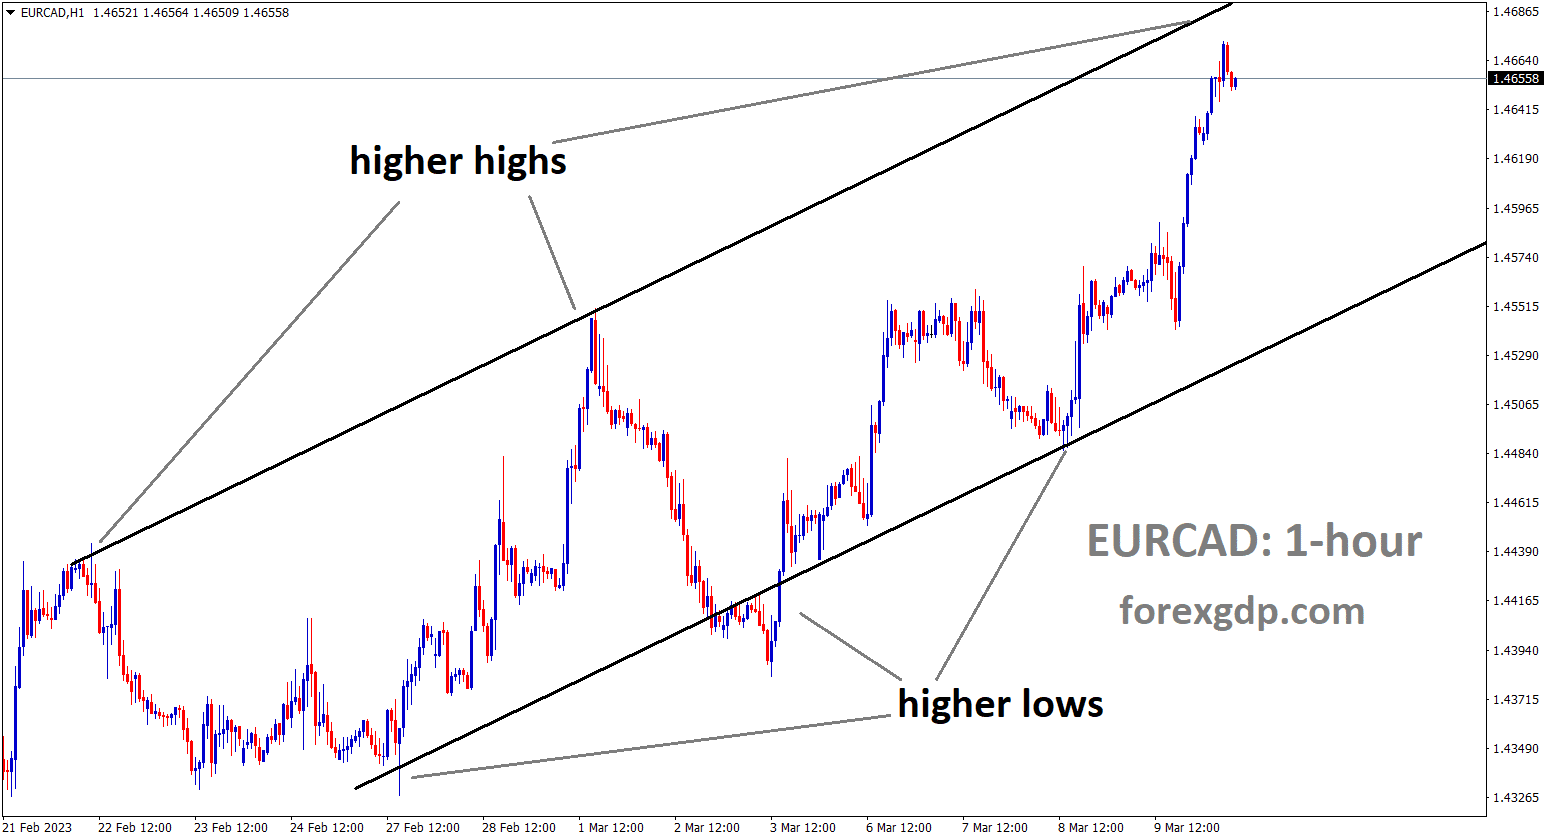 EURCAD is moving in a ascending channel and the market has reached the high high area of the channel.